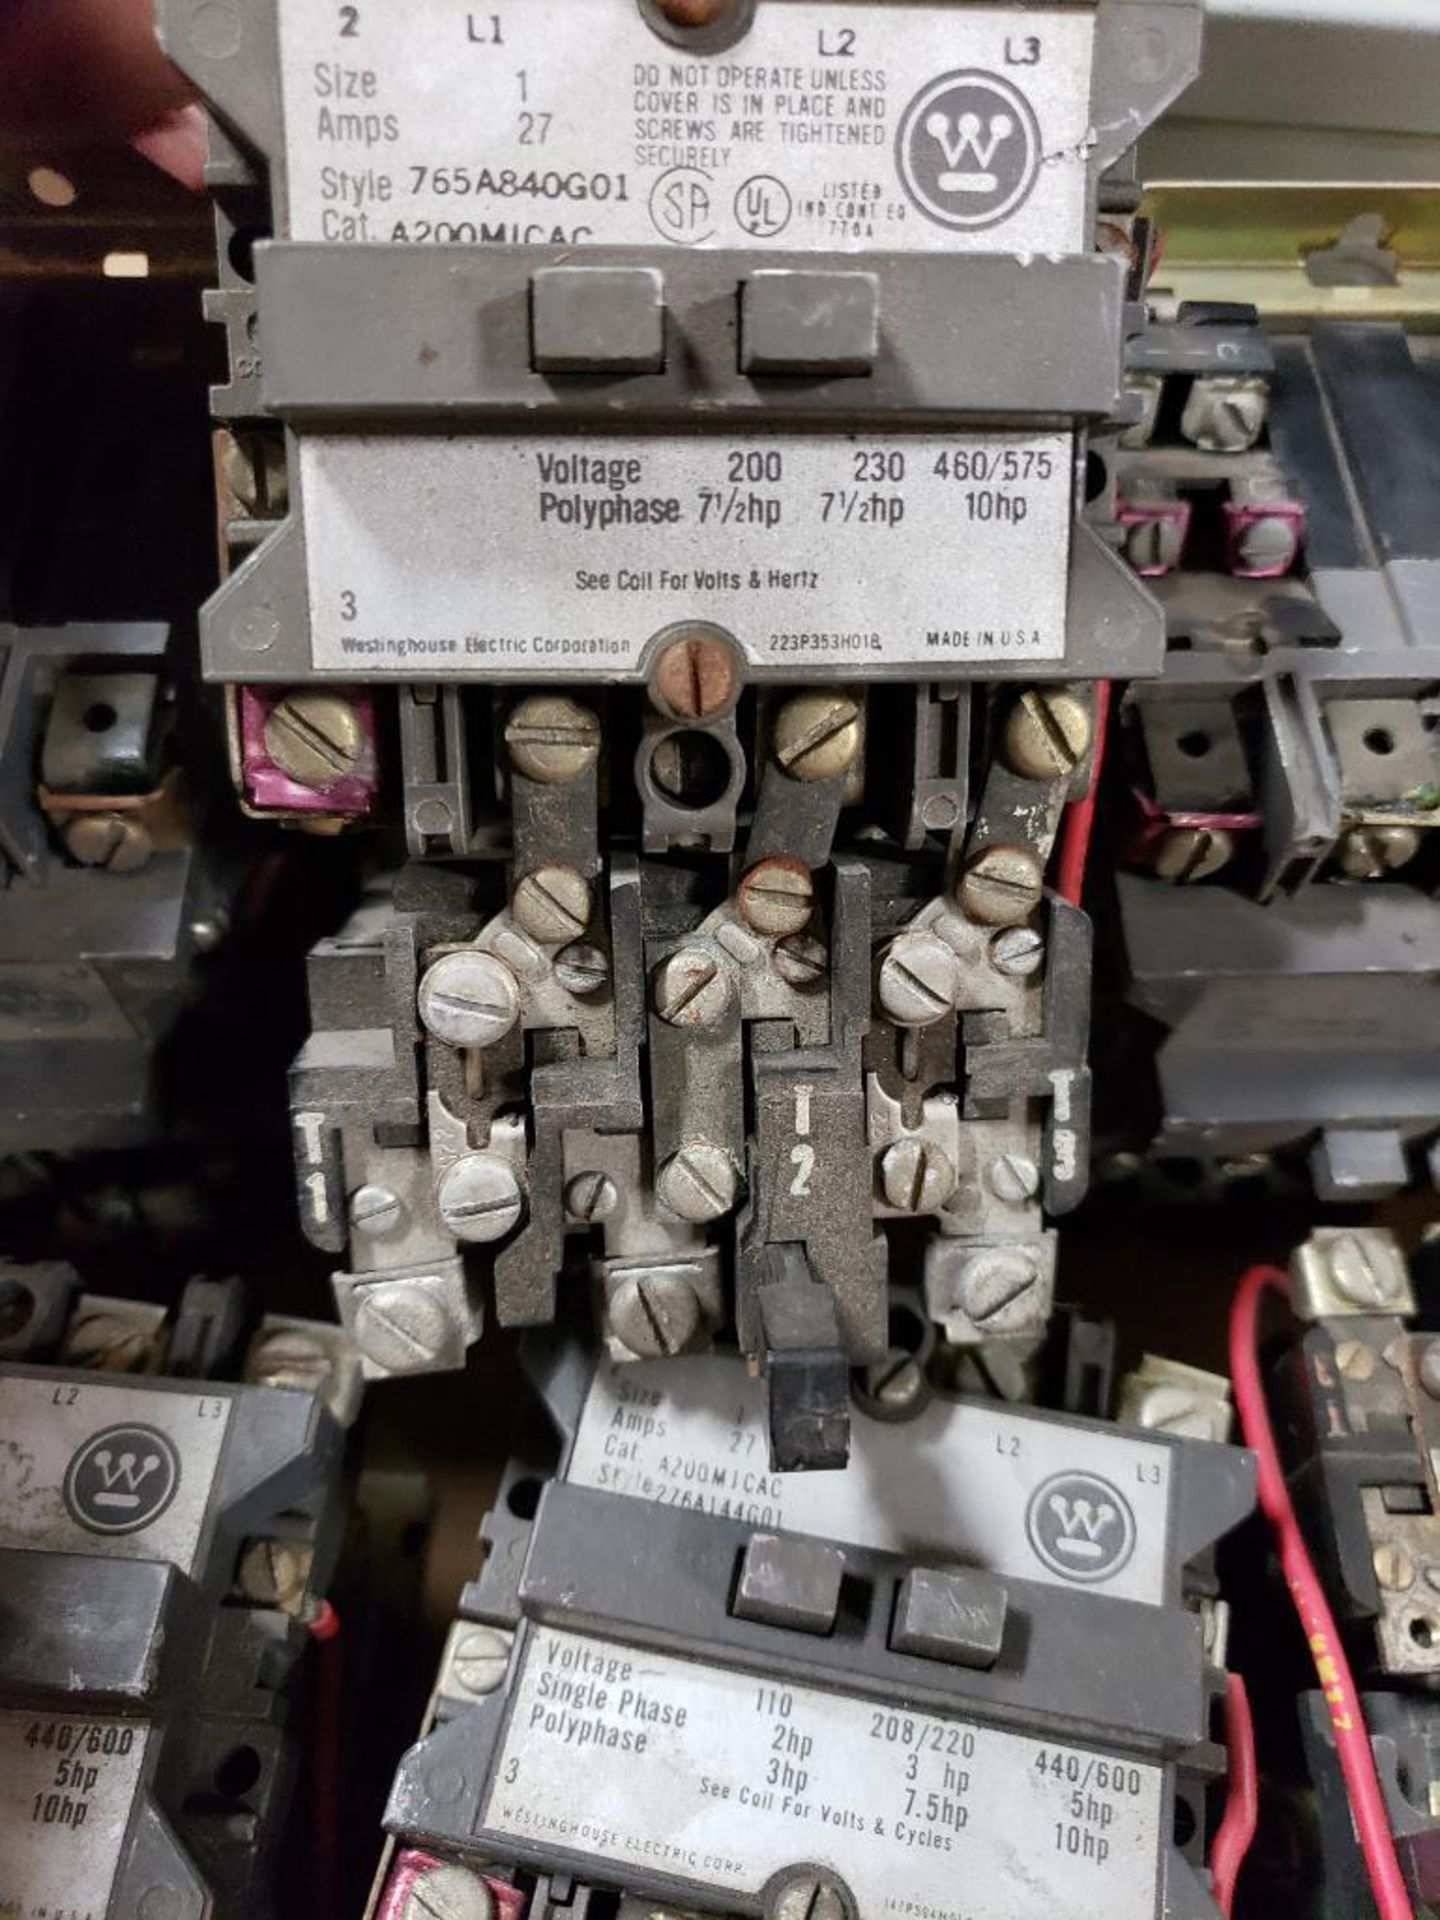 Qty 6 - Westinghouse starter contactors. A200M1CAC 27AMP. - Image 7 of 9